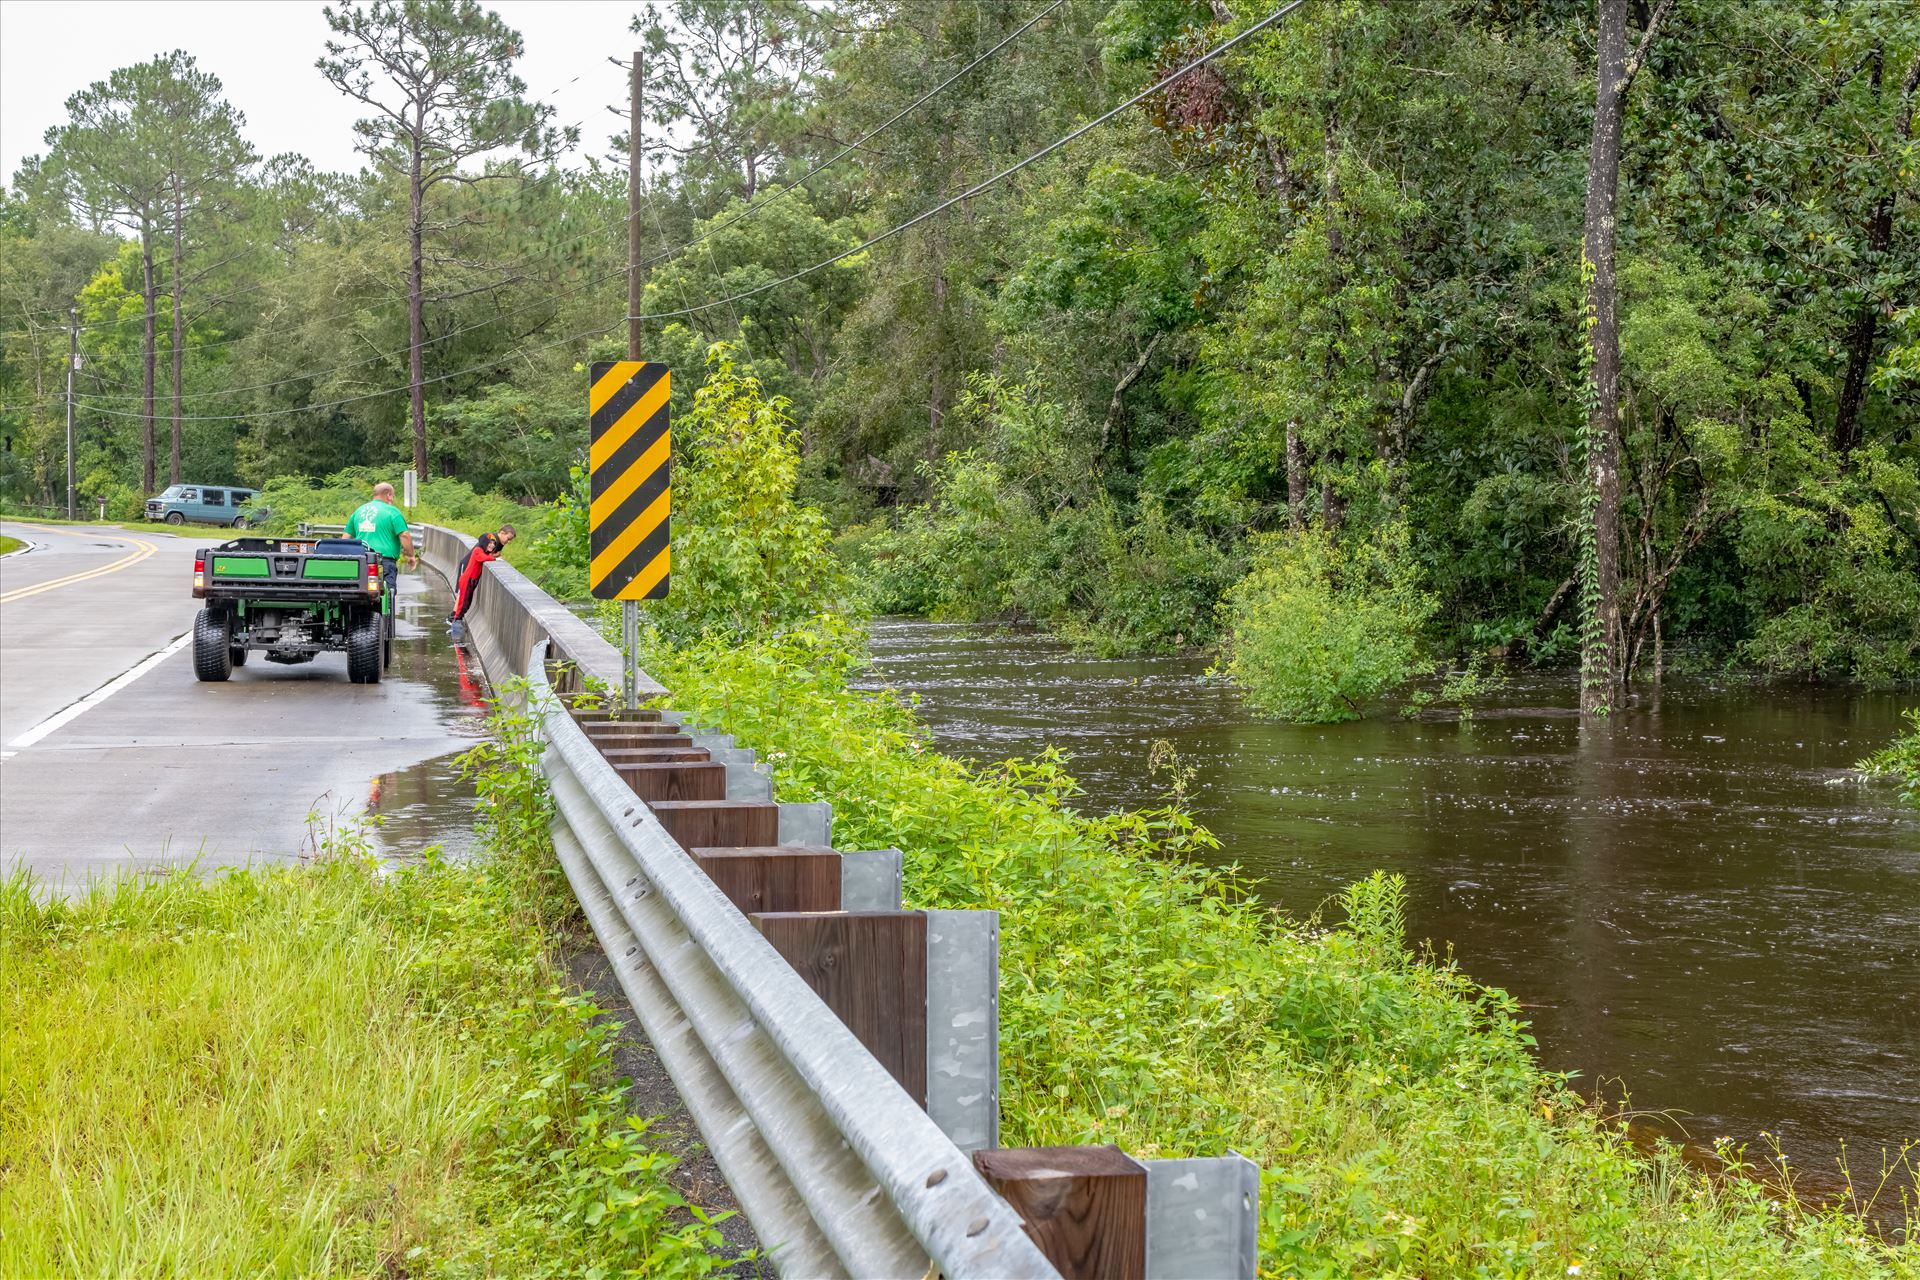 bear creek out of bank 5 August 02, 2018.jpg - August 02, 2018 heavy rains flooded many parts of Bay County, Florida. This photo is in the Bear Creek area. by Terry Kelly Photography